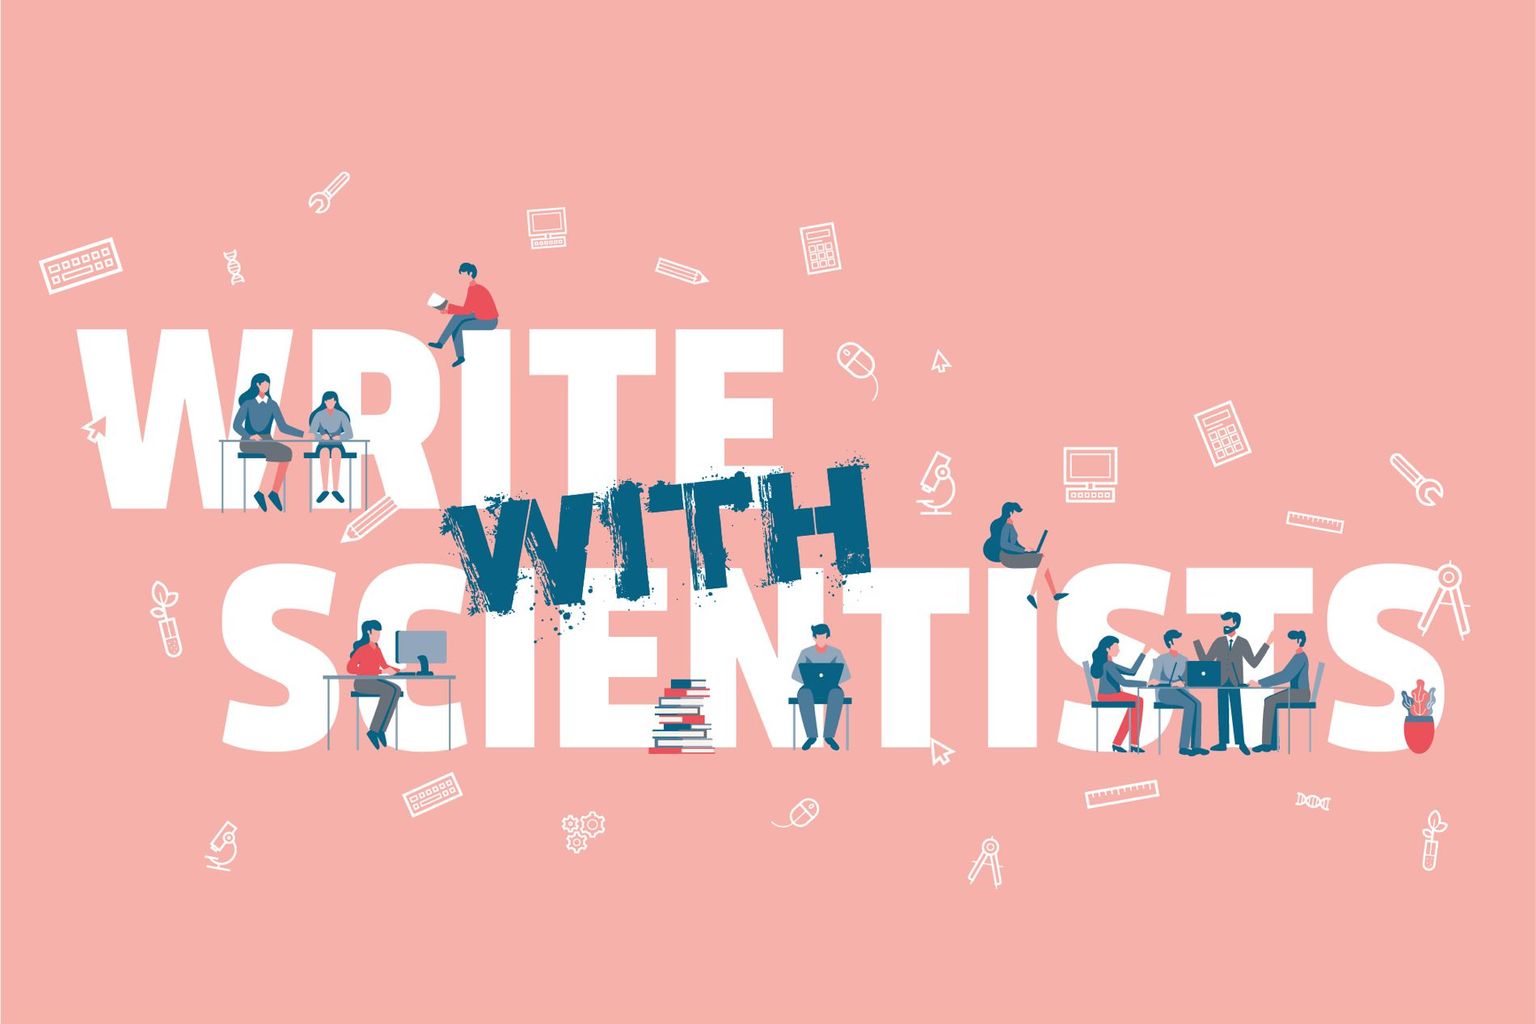 WRITE with SCIENTISTS